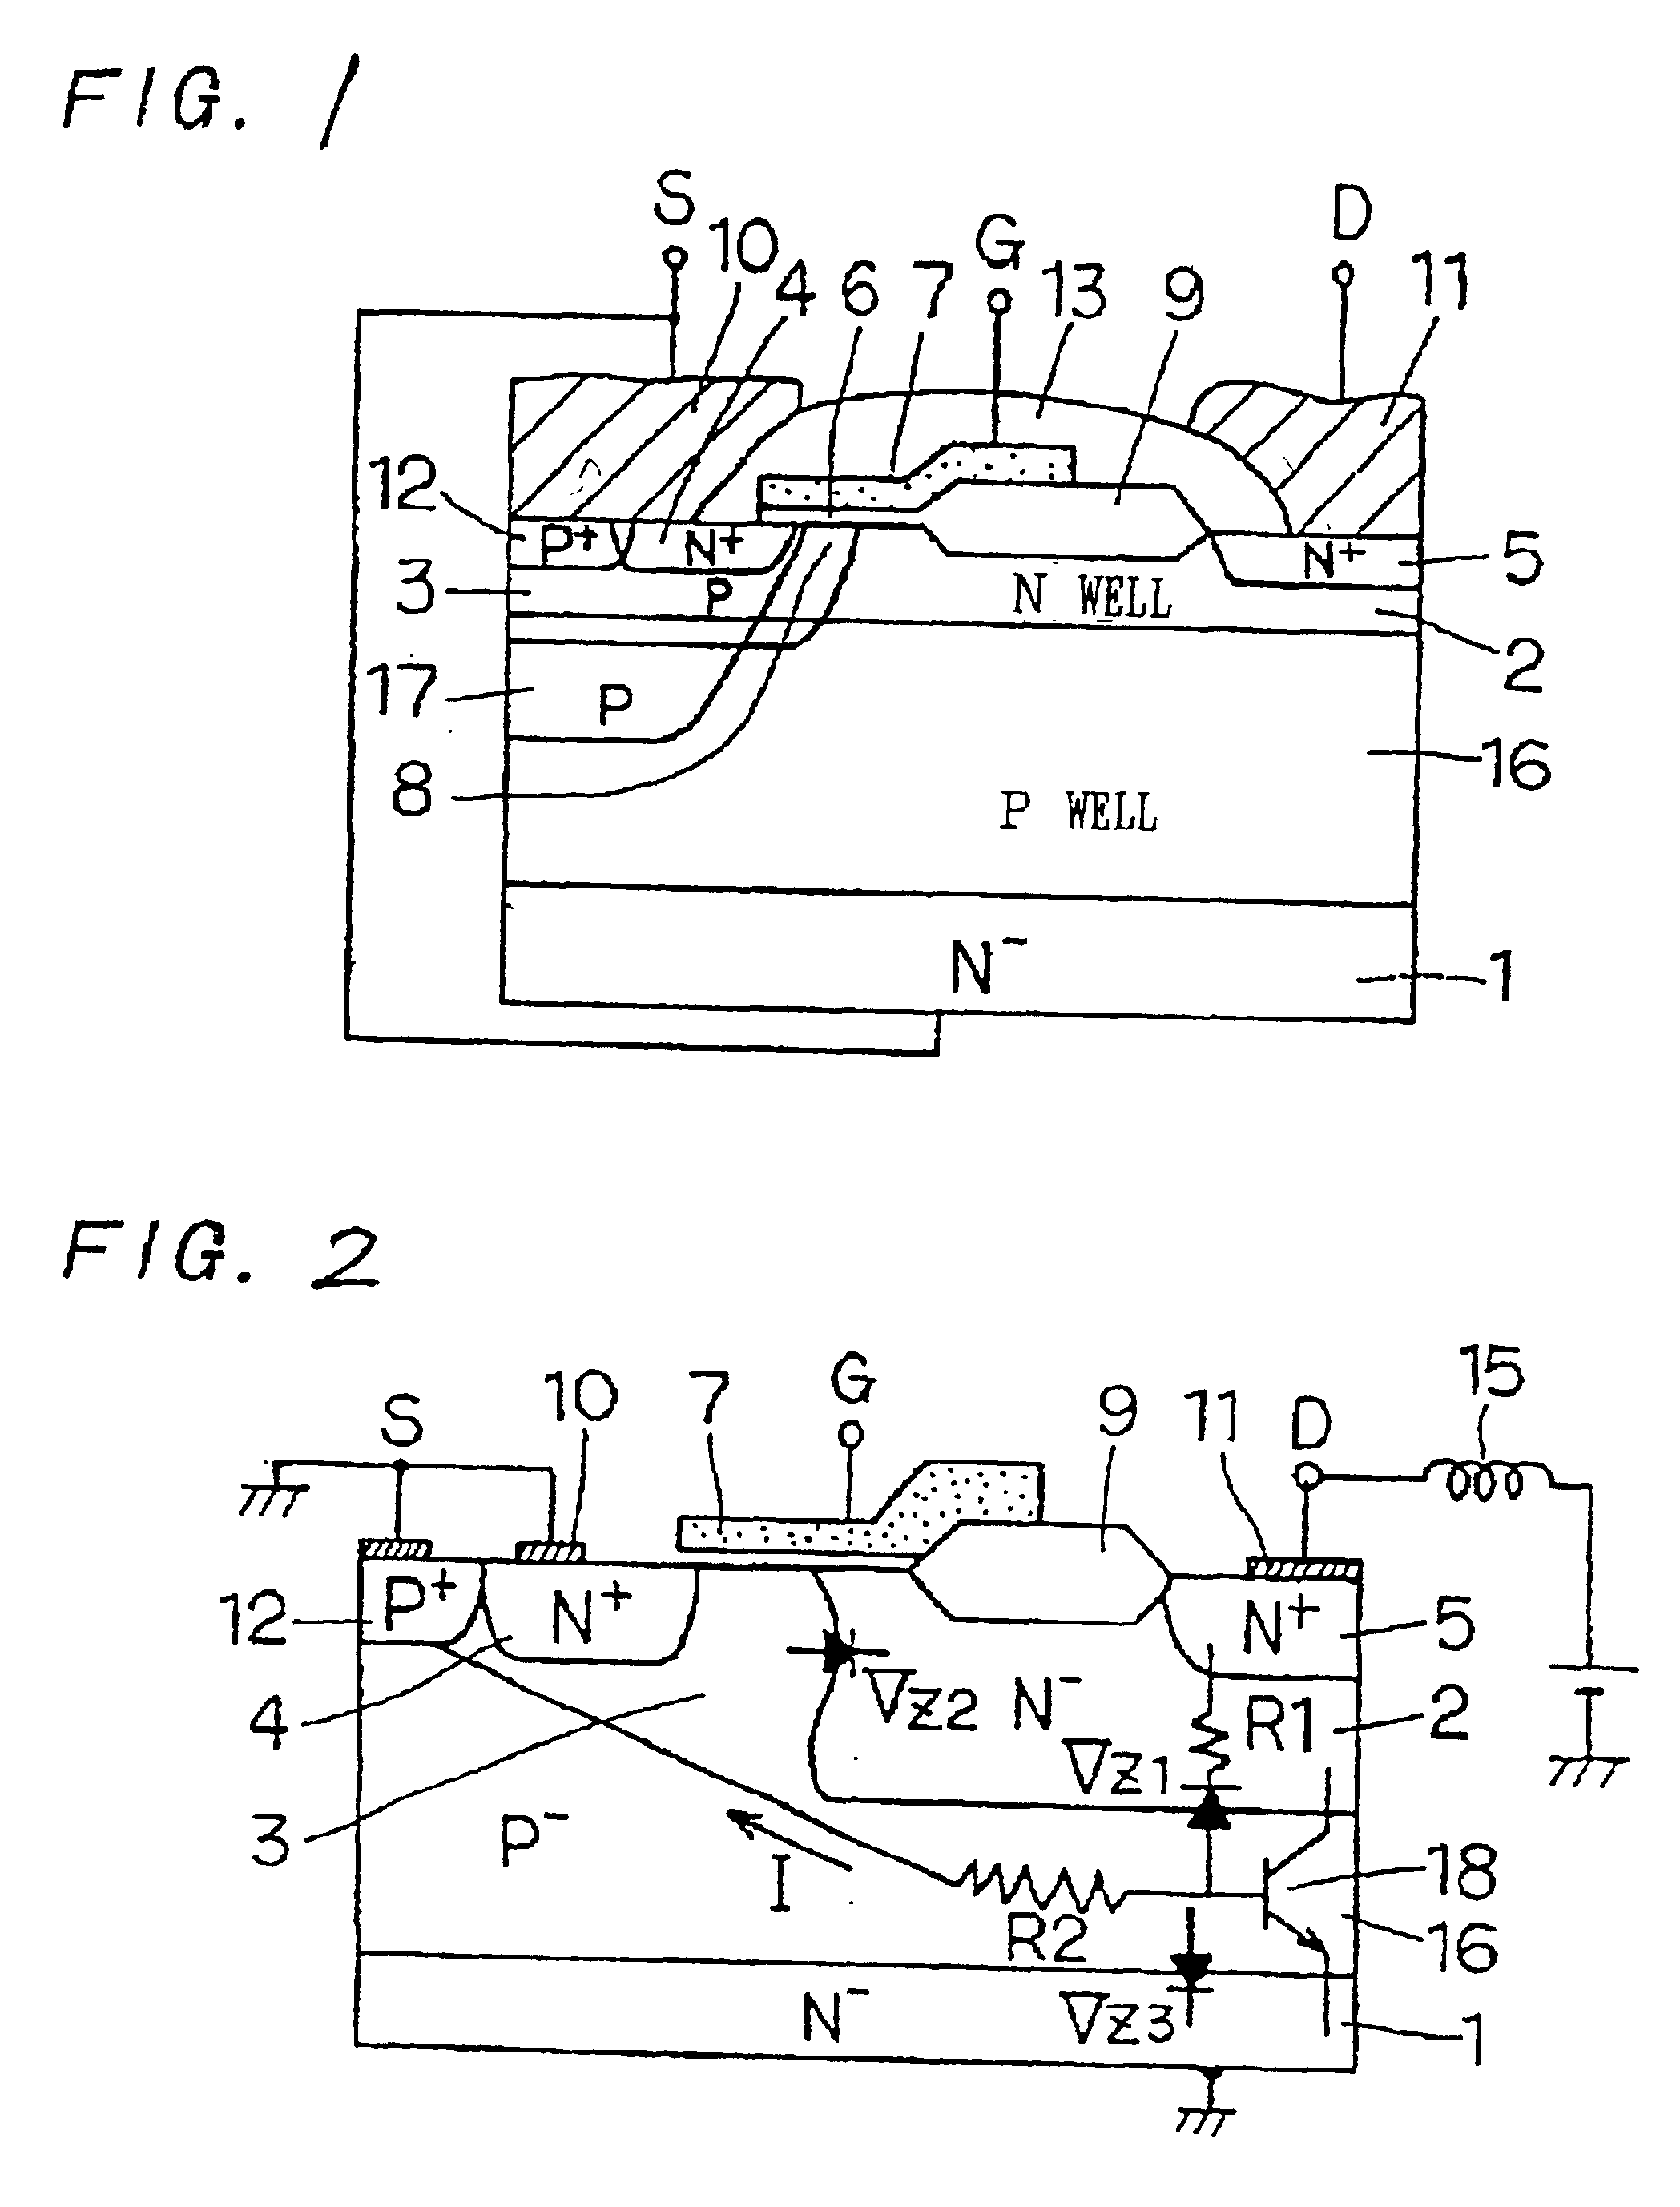 Power MOS transistor for absorbing surge current